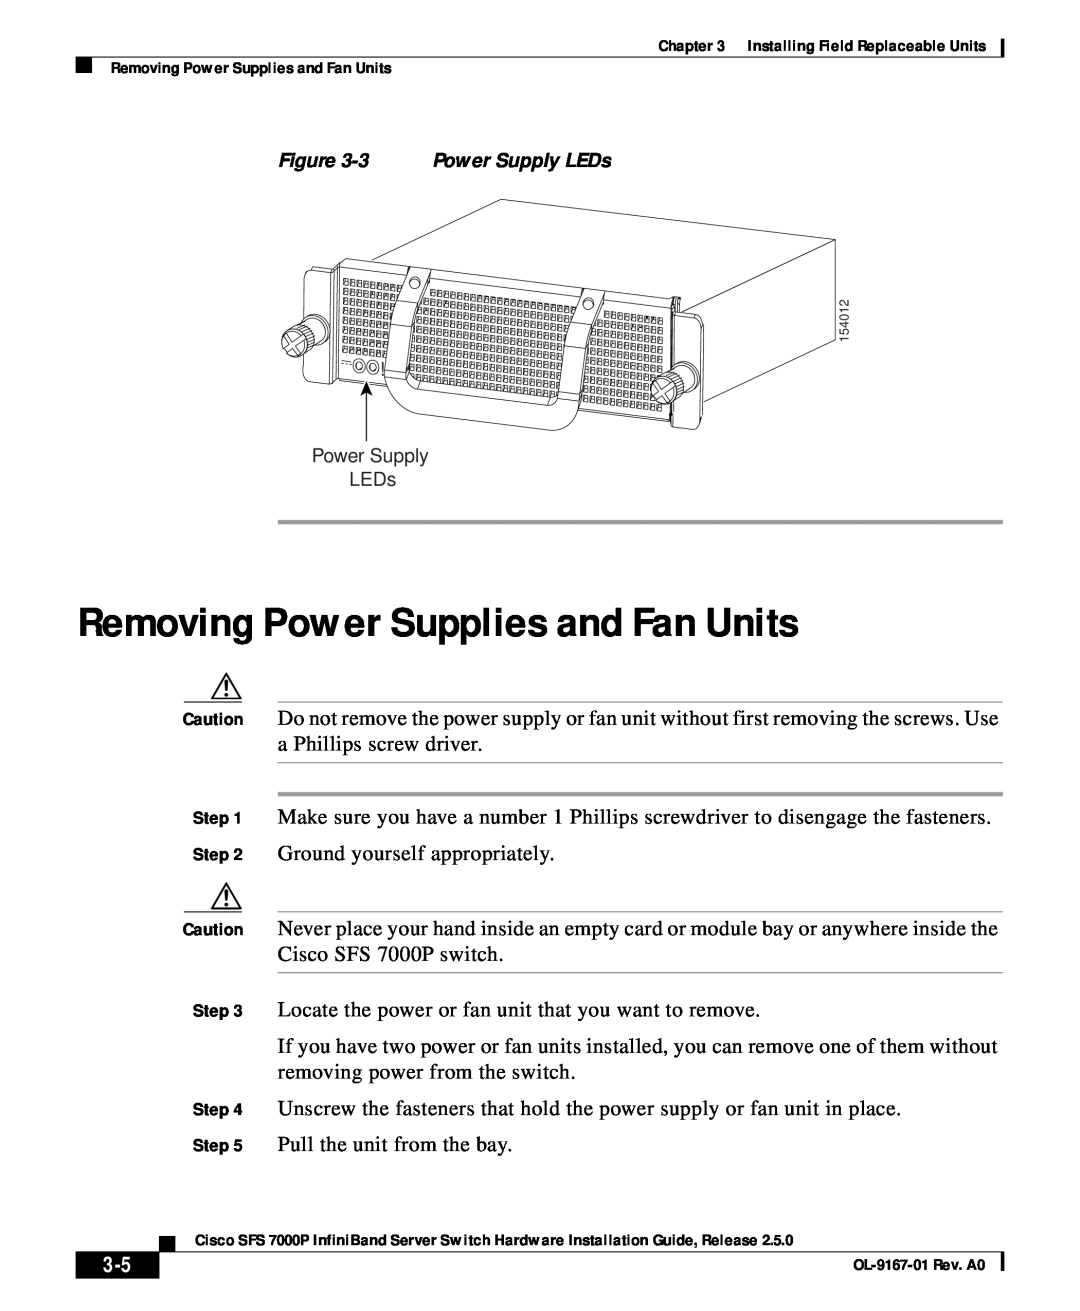 Cisco Systems SFS 7000P manual Removing Power Supplies and Fan Units 